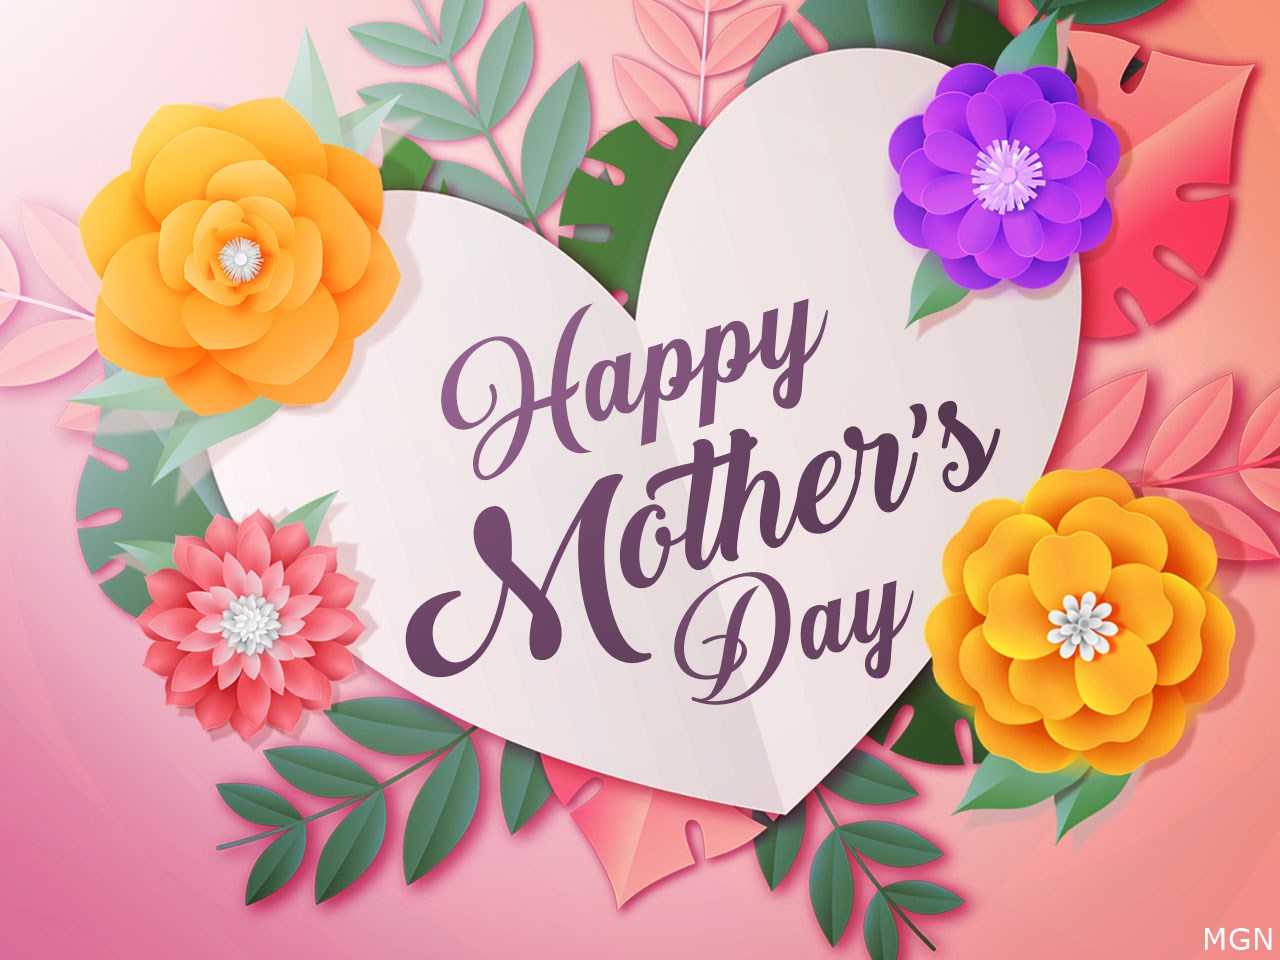 Happy Mother's Day: Shout out your mom on WTVM!